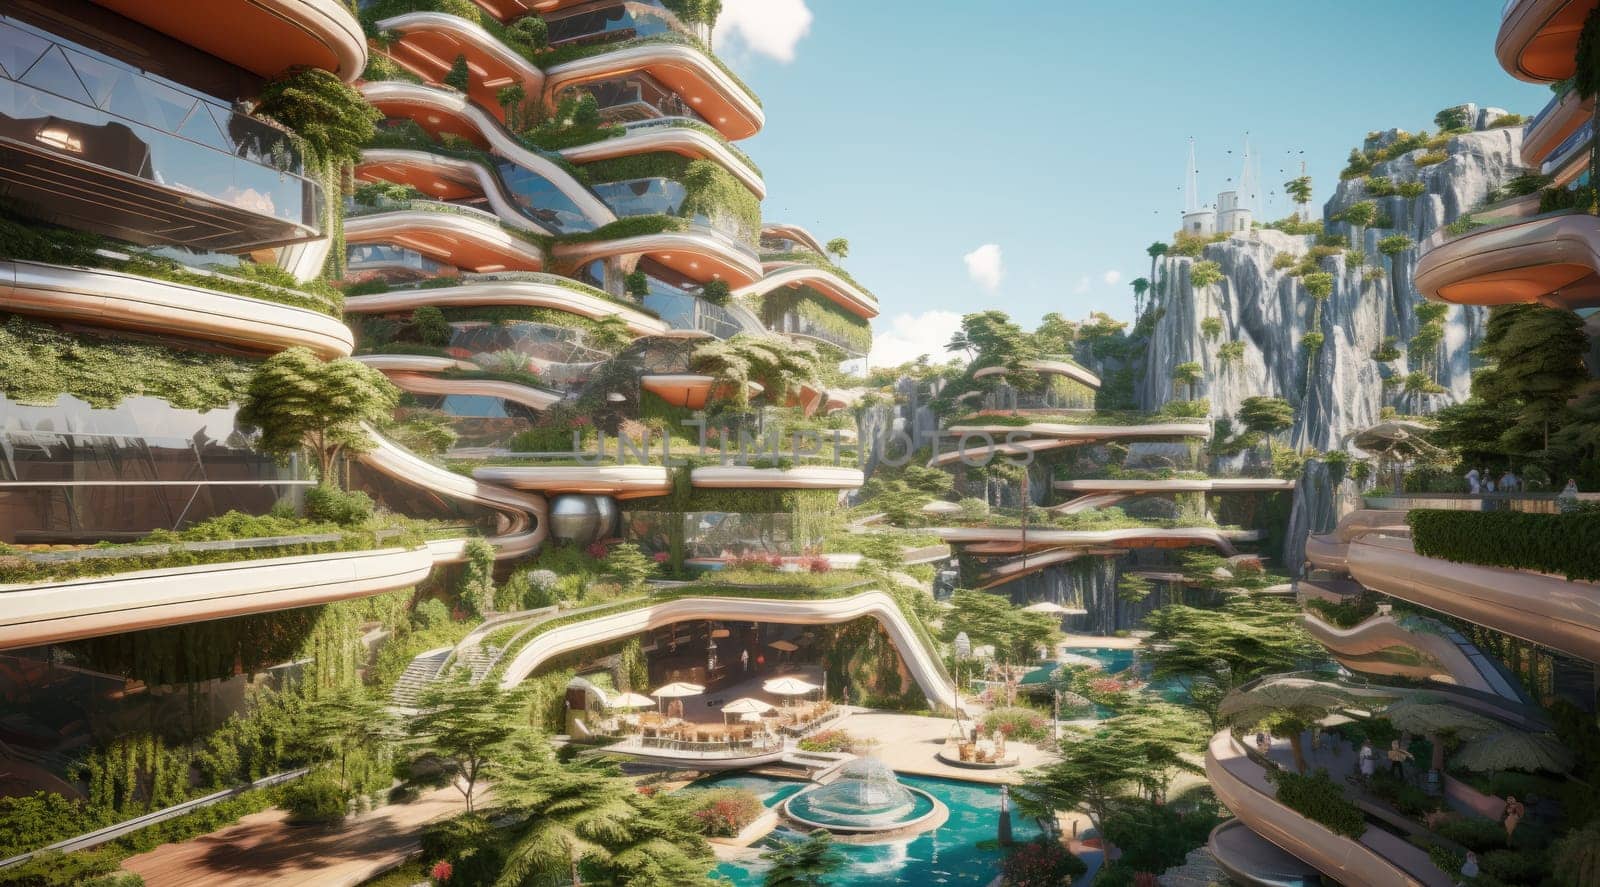 Architecture of the future, lots of green plants and balconies. A vision for the future